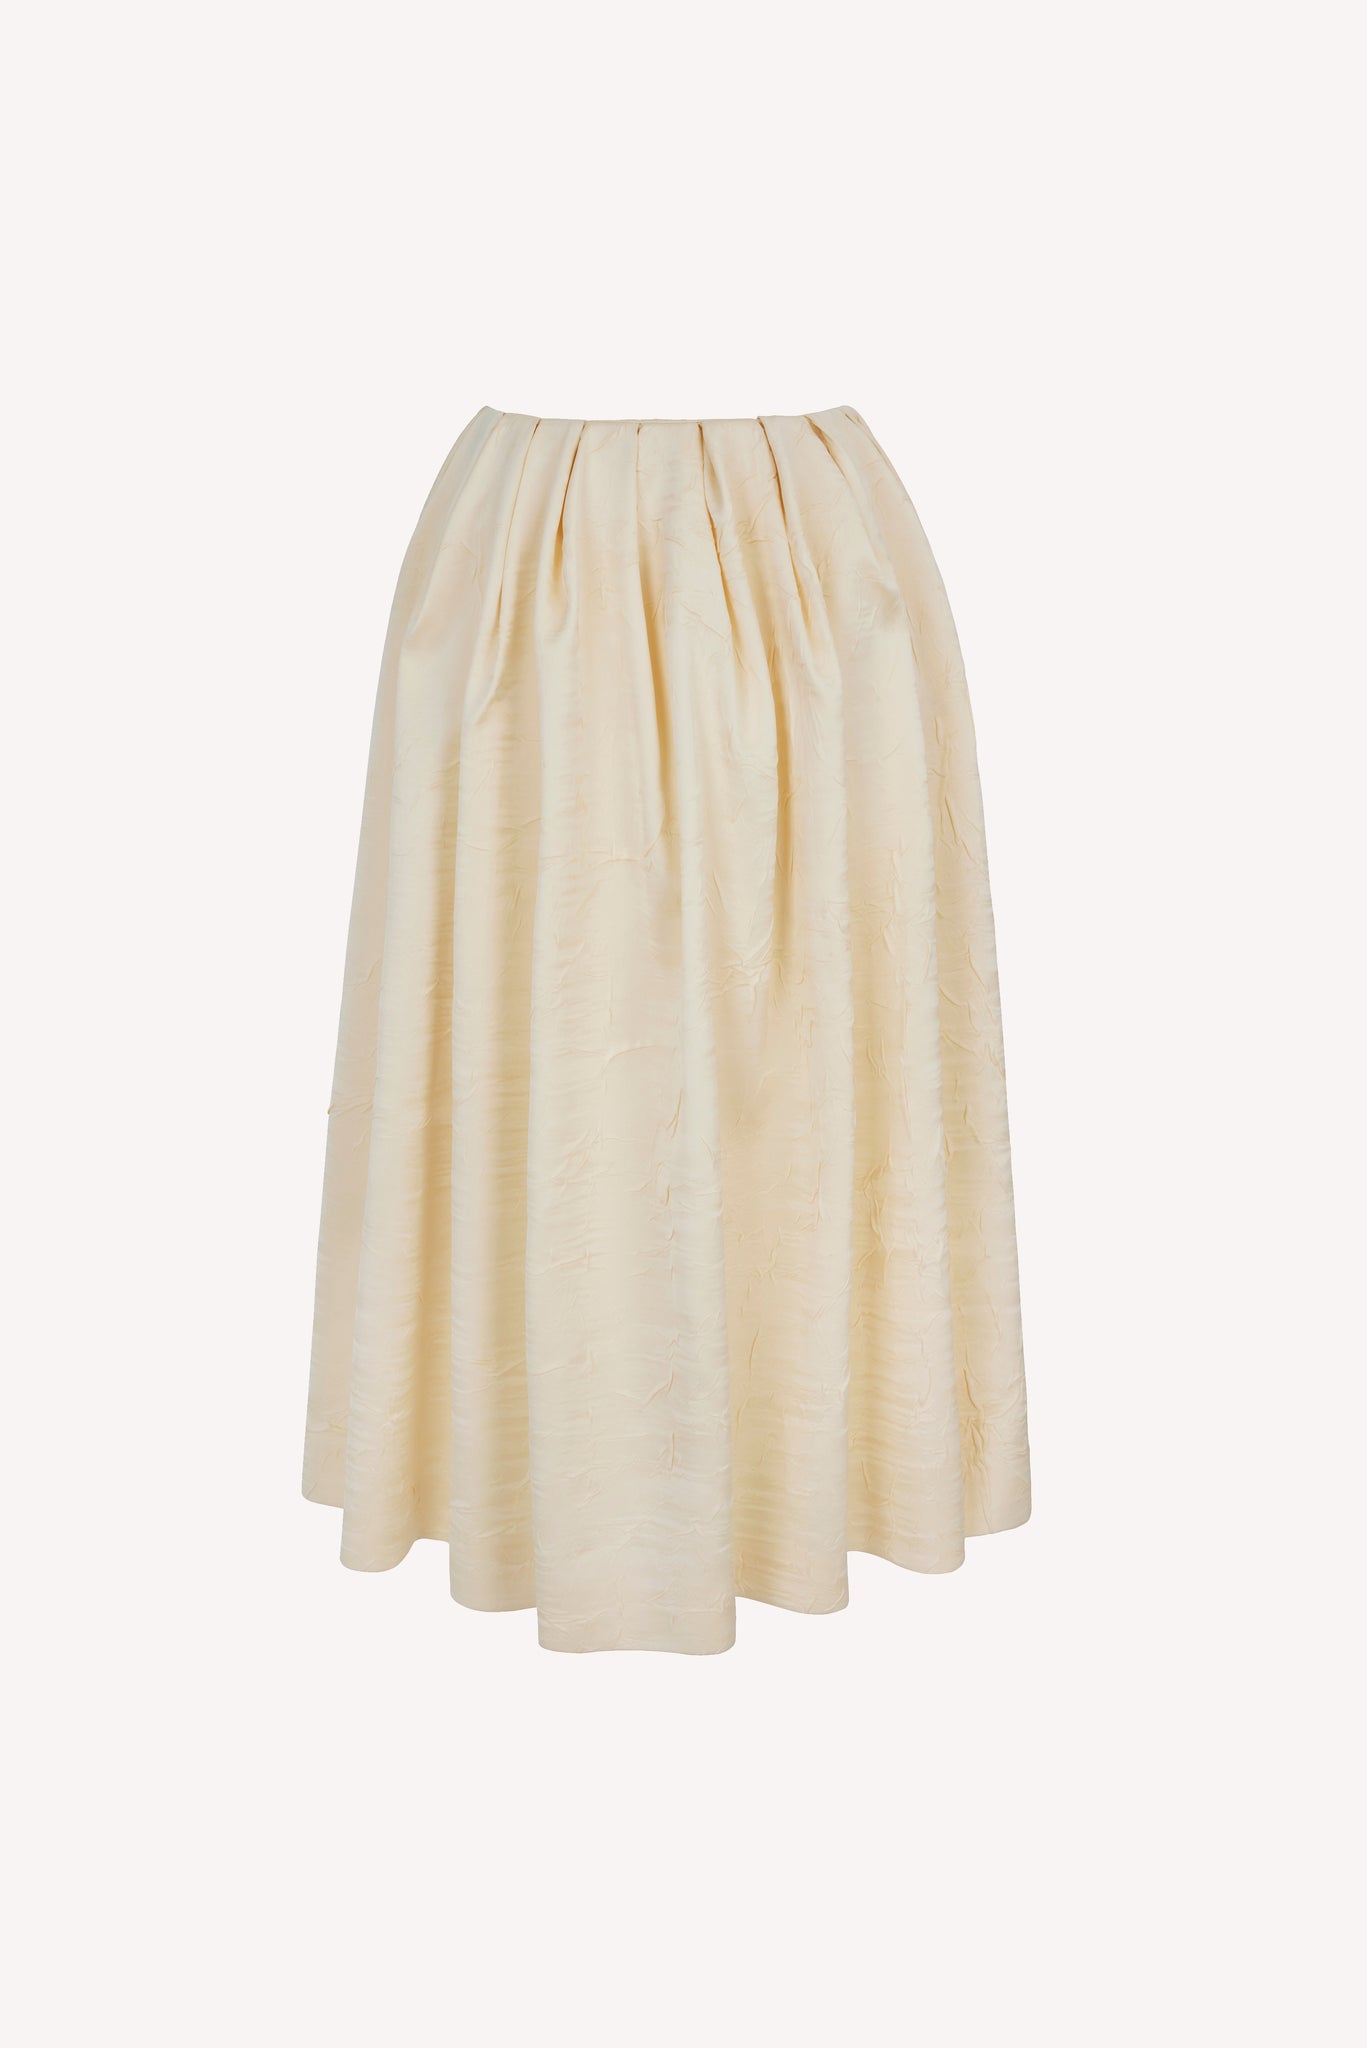 Delphine Skirt in Ivory Crushed Satin